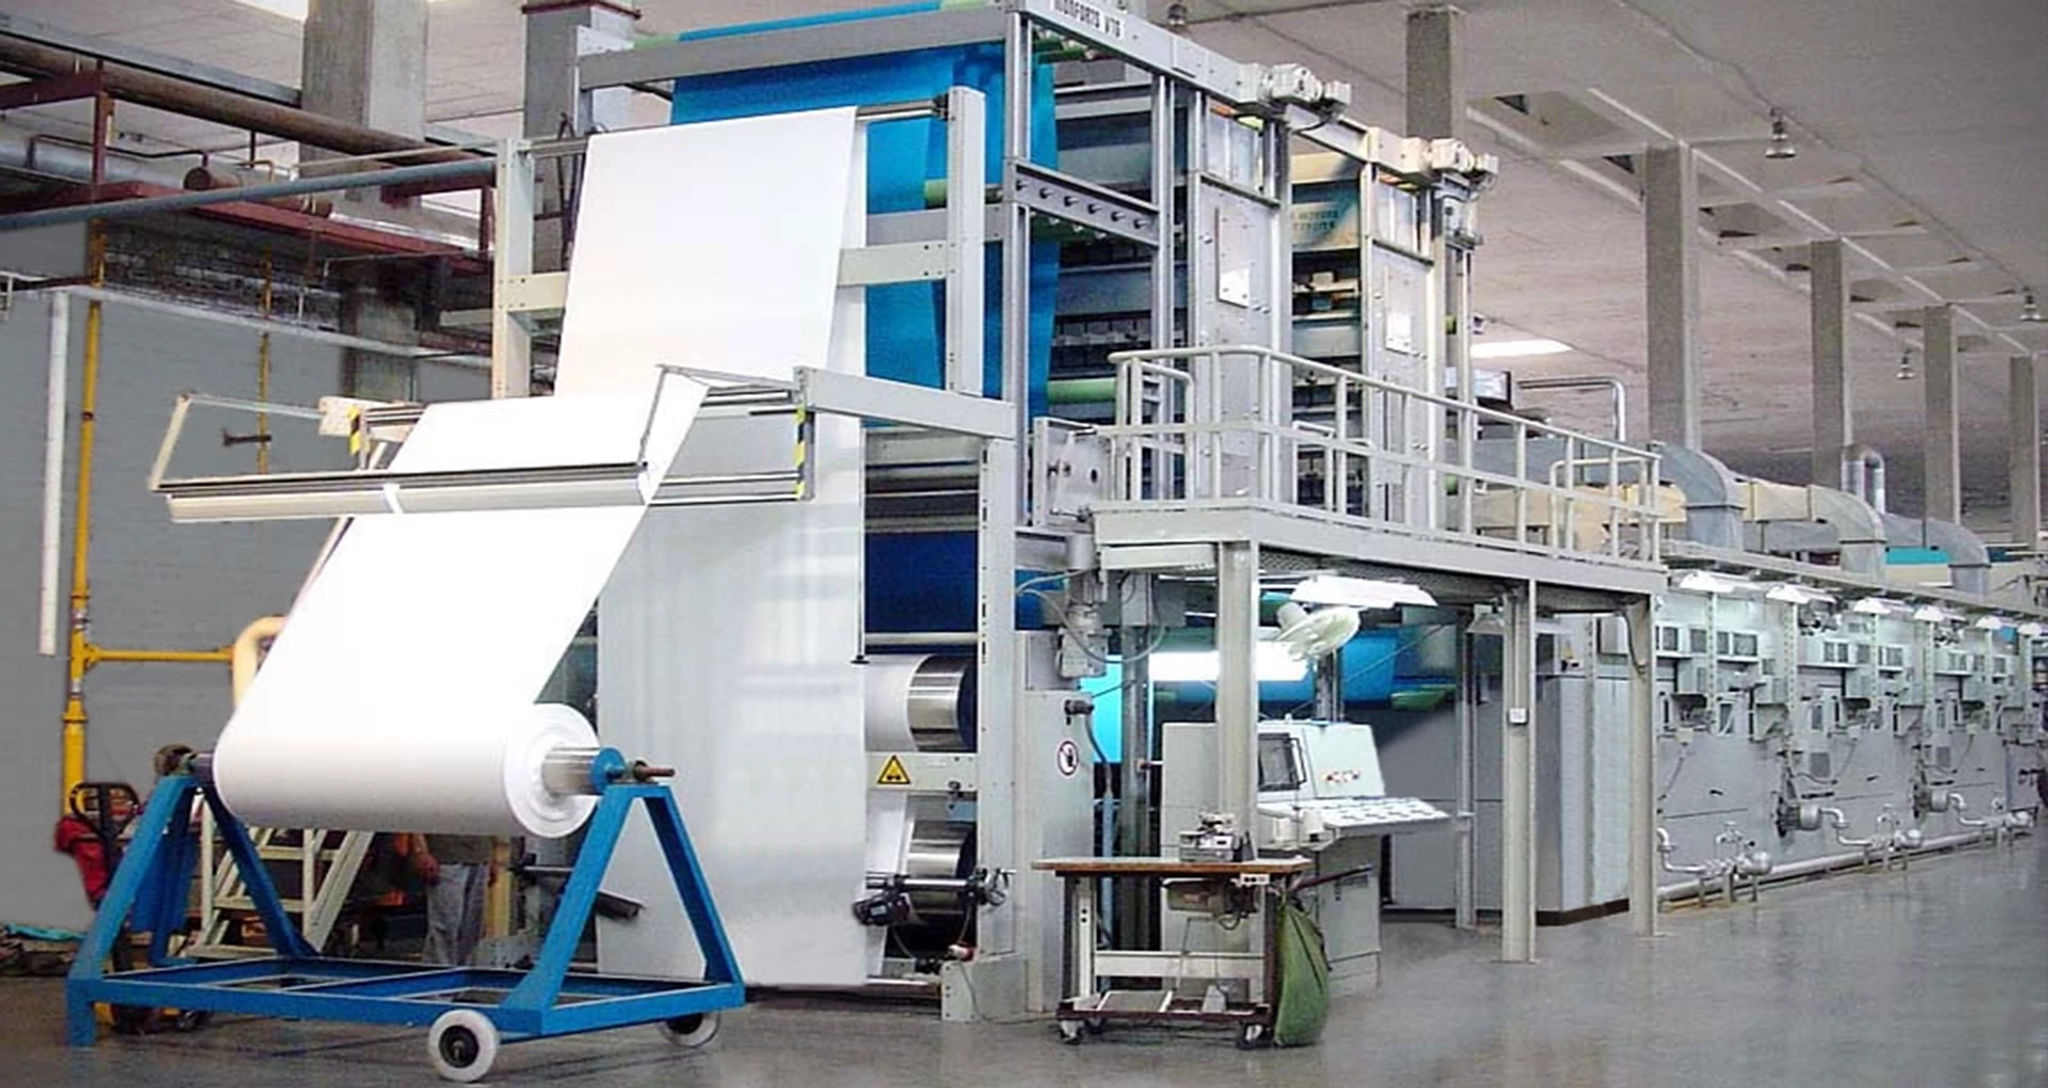 The production floor at Sapphire Mills, where woven fabrics powered by LYCRA® brand spandex solutions are produced.